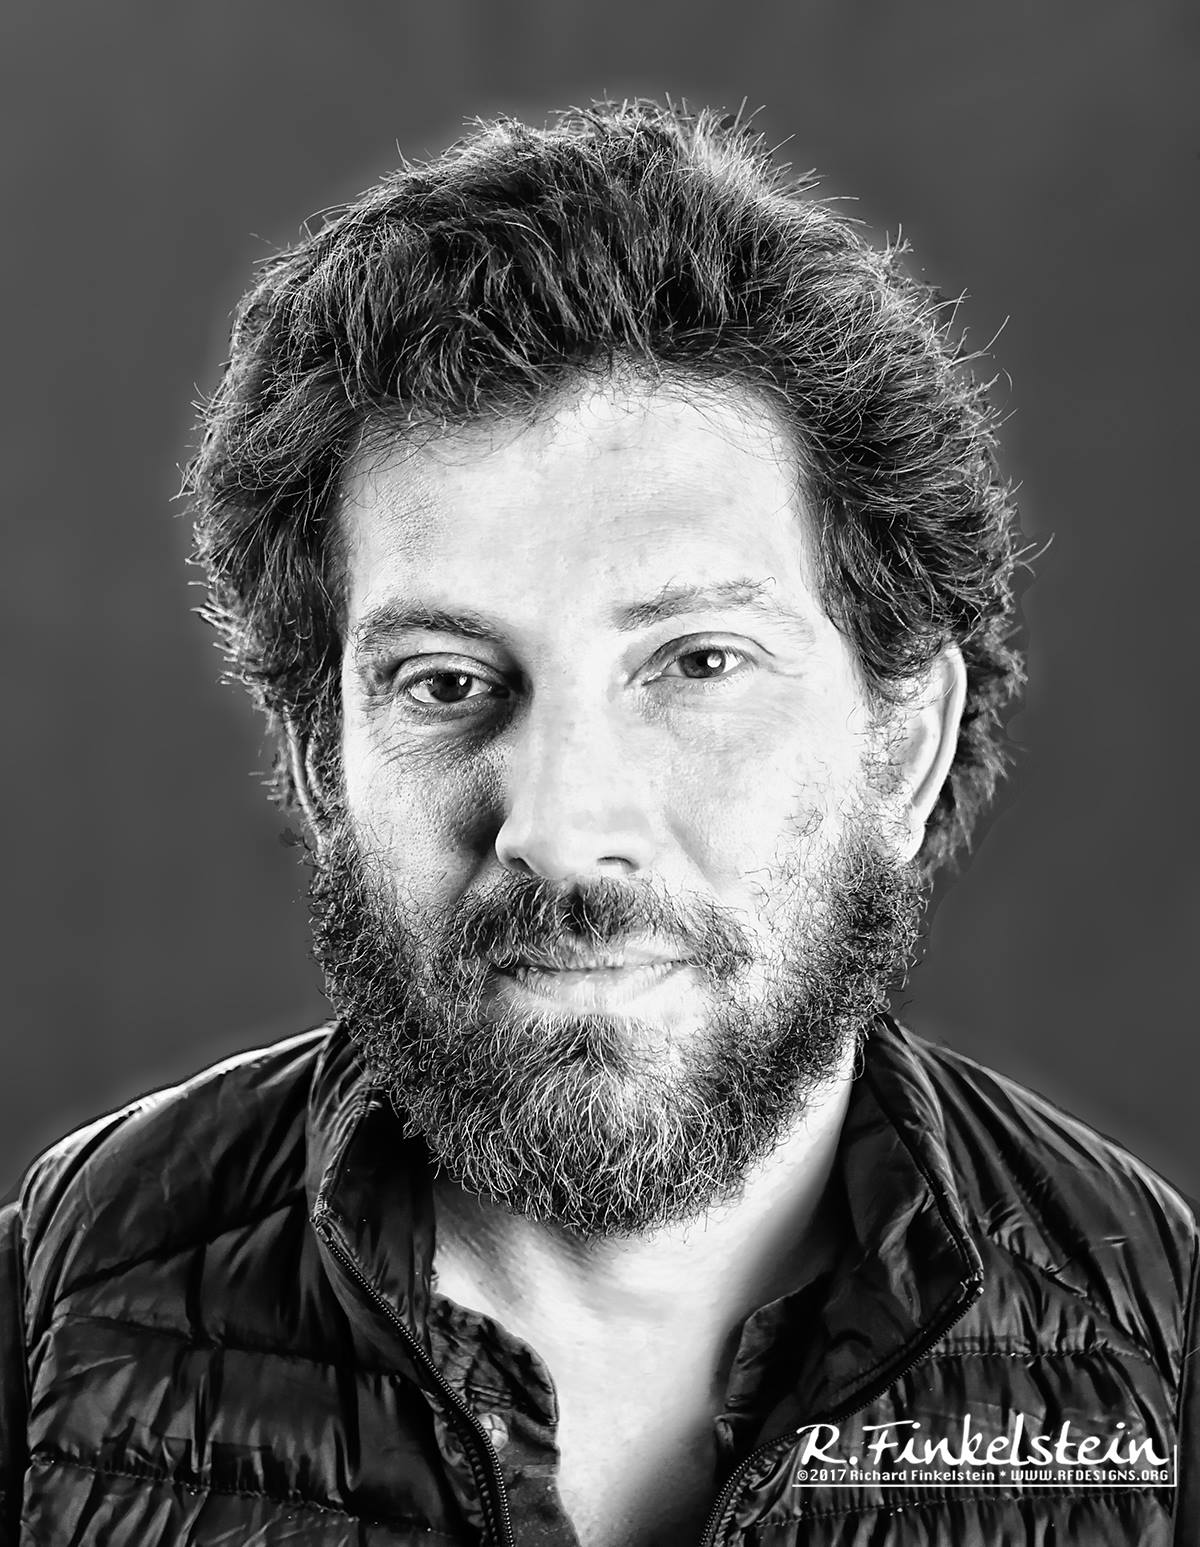 Image description: A professional headshot photo of Julian Boal. Julian is smiling and facing the camera and the photo is in grayscale.